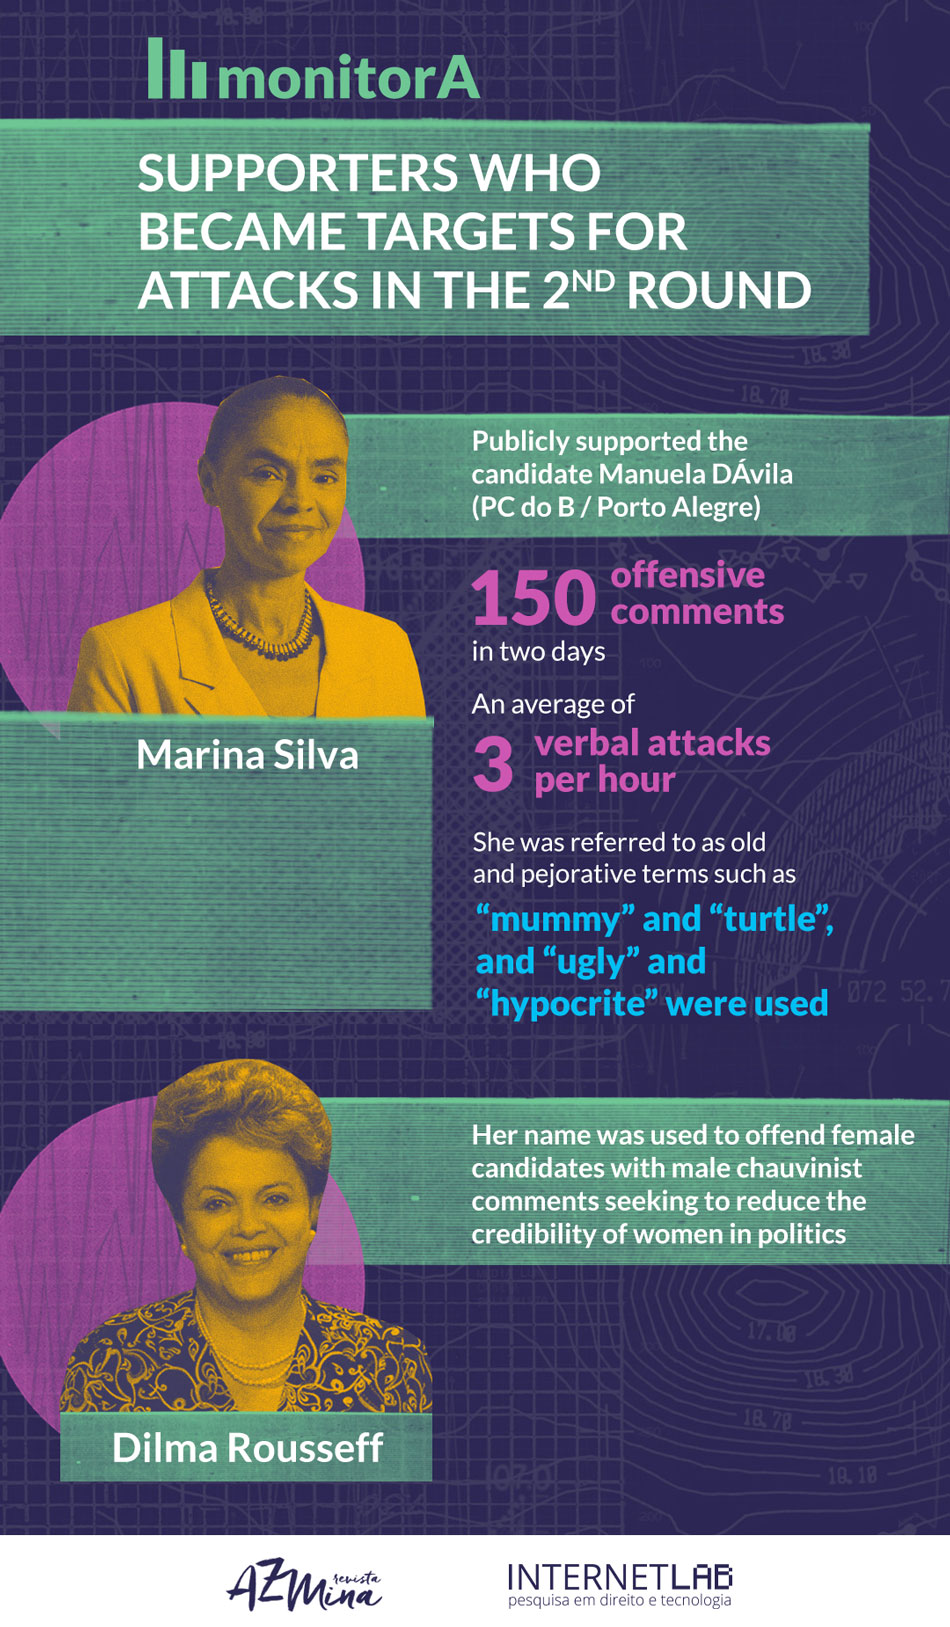 The image informs that the supporters became the target of attacks in the 2nd round. There is a photo of Marina Silva indicating that she expressed support for the candidate Manuela D'ávila and in two days she received 150 offensive comments with an average of 3 curses per hour. She was called old woman with pejorative terms like mummy and tortoise and also ugly and hypocrite. Below, a photo of Dilma Rousseff with the information that she was cited to offend candidates, with sexist comments that discredit the role of women in politics.